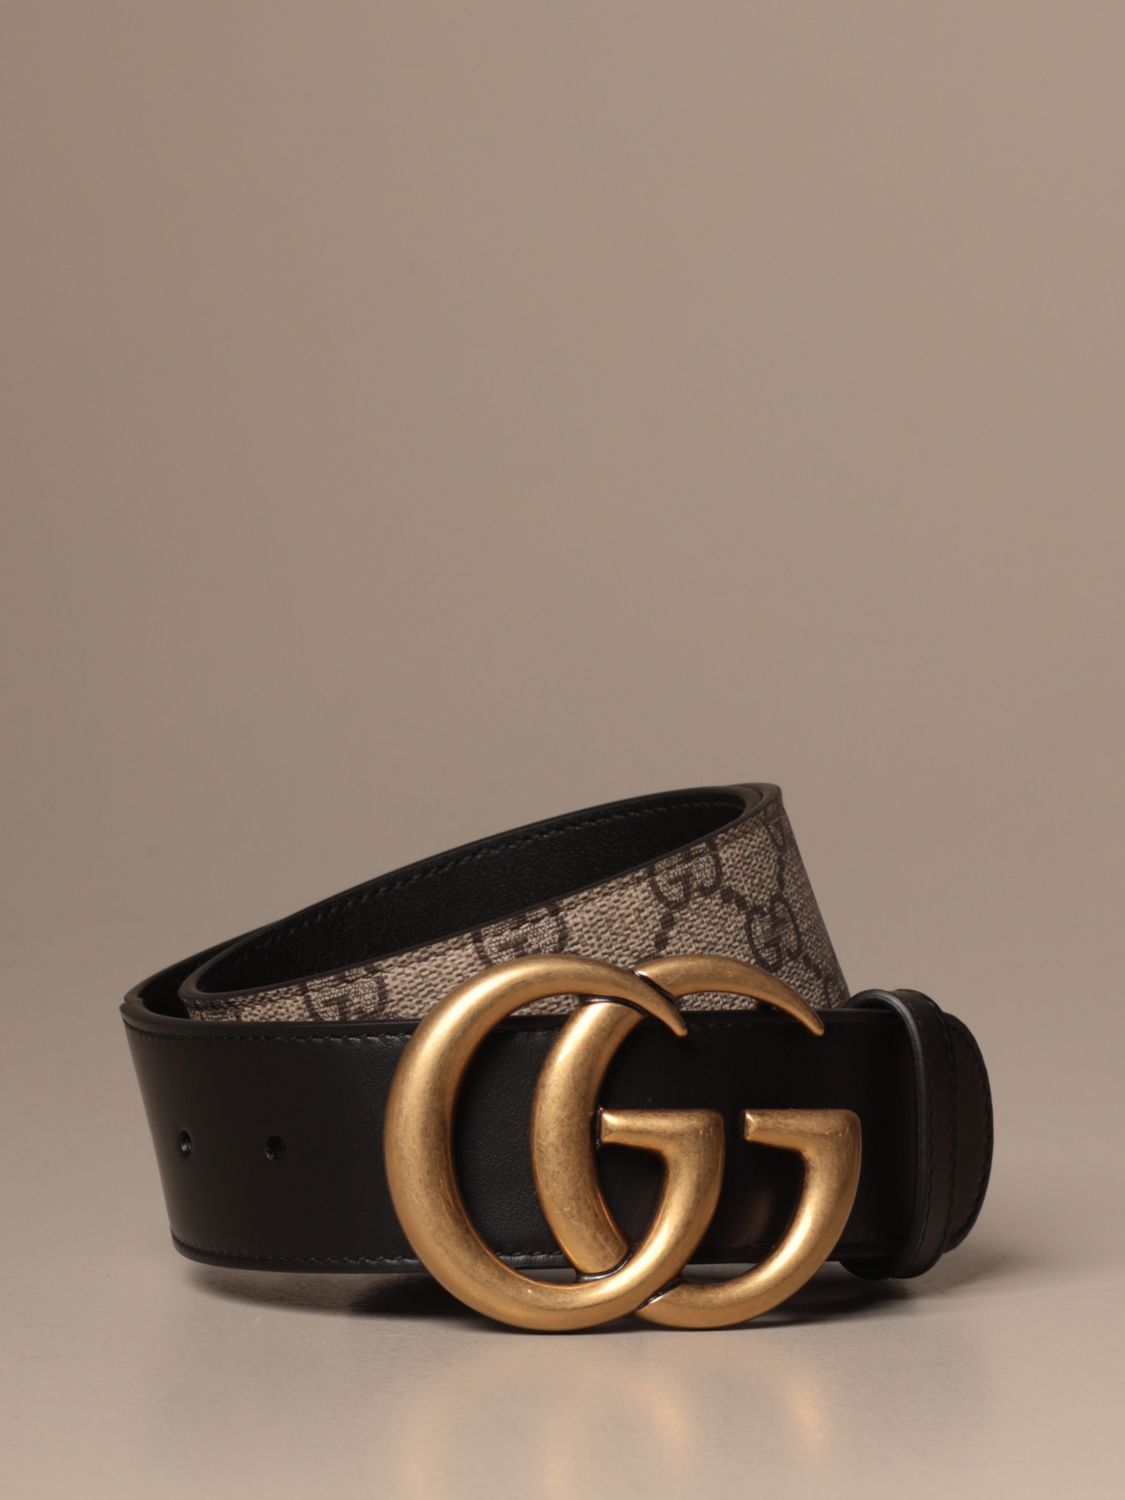 gucci belt buckle material